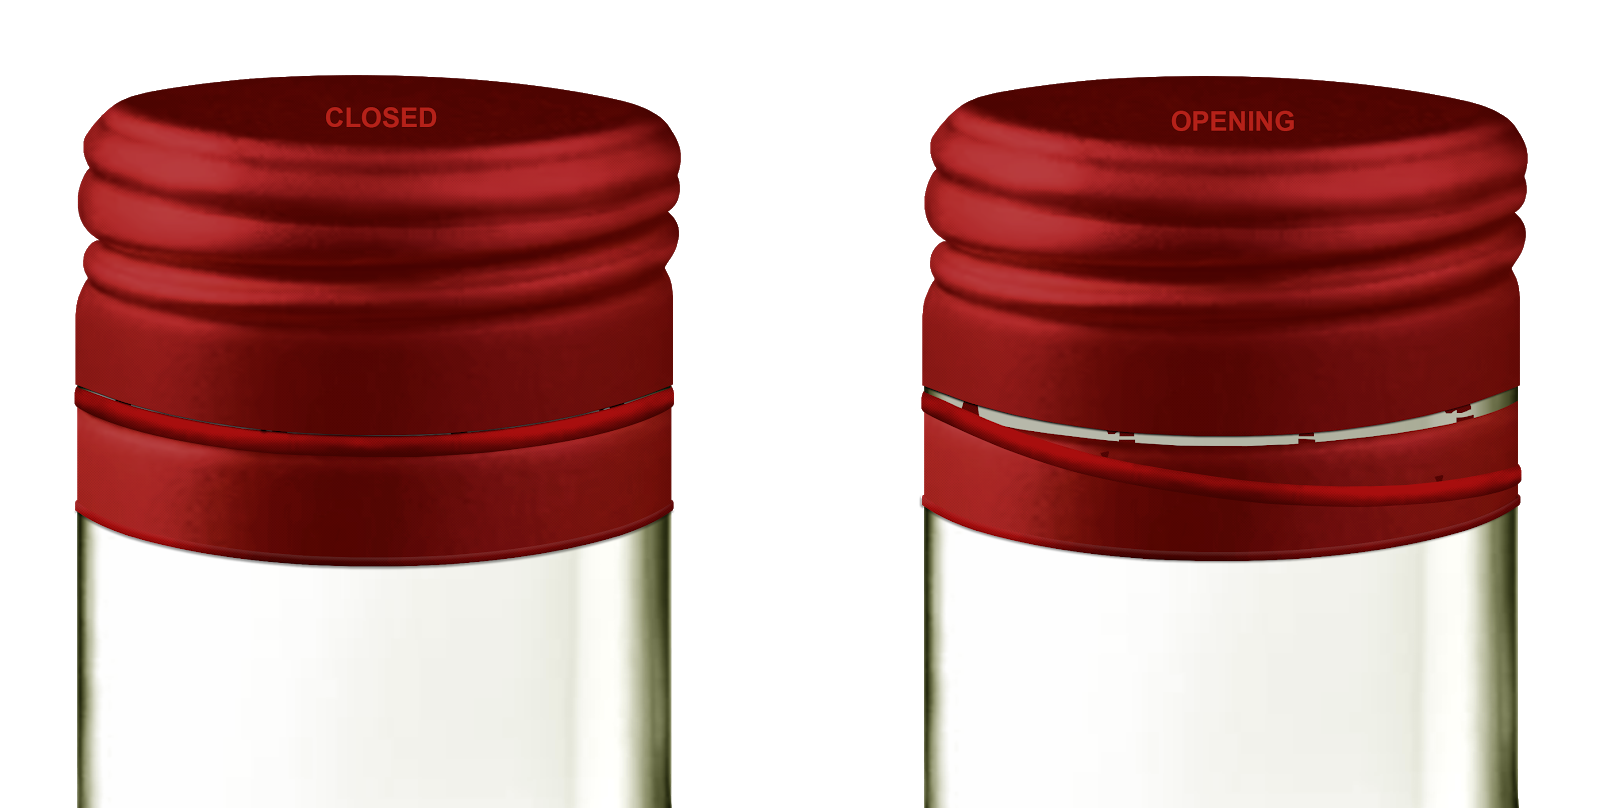 Aluminum Tamper-Evident Closure for glass bottles alcoholic products.